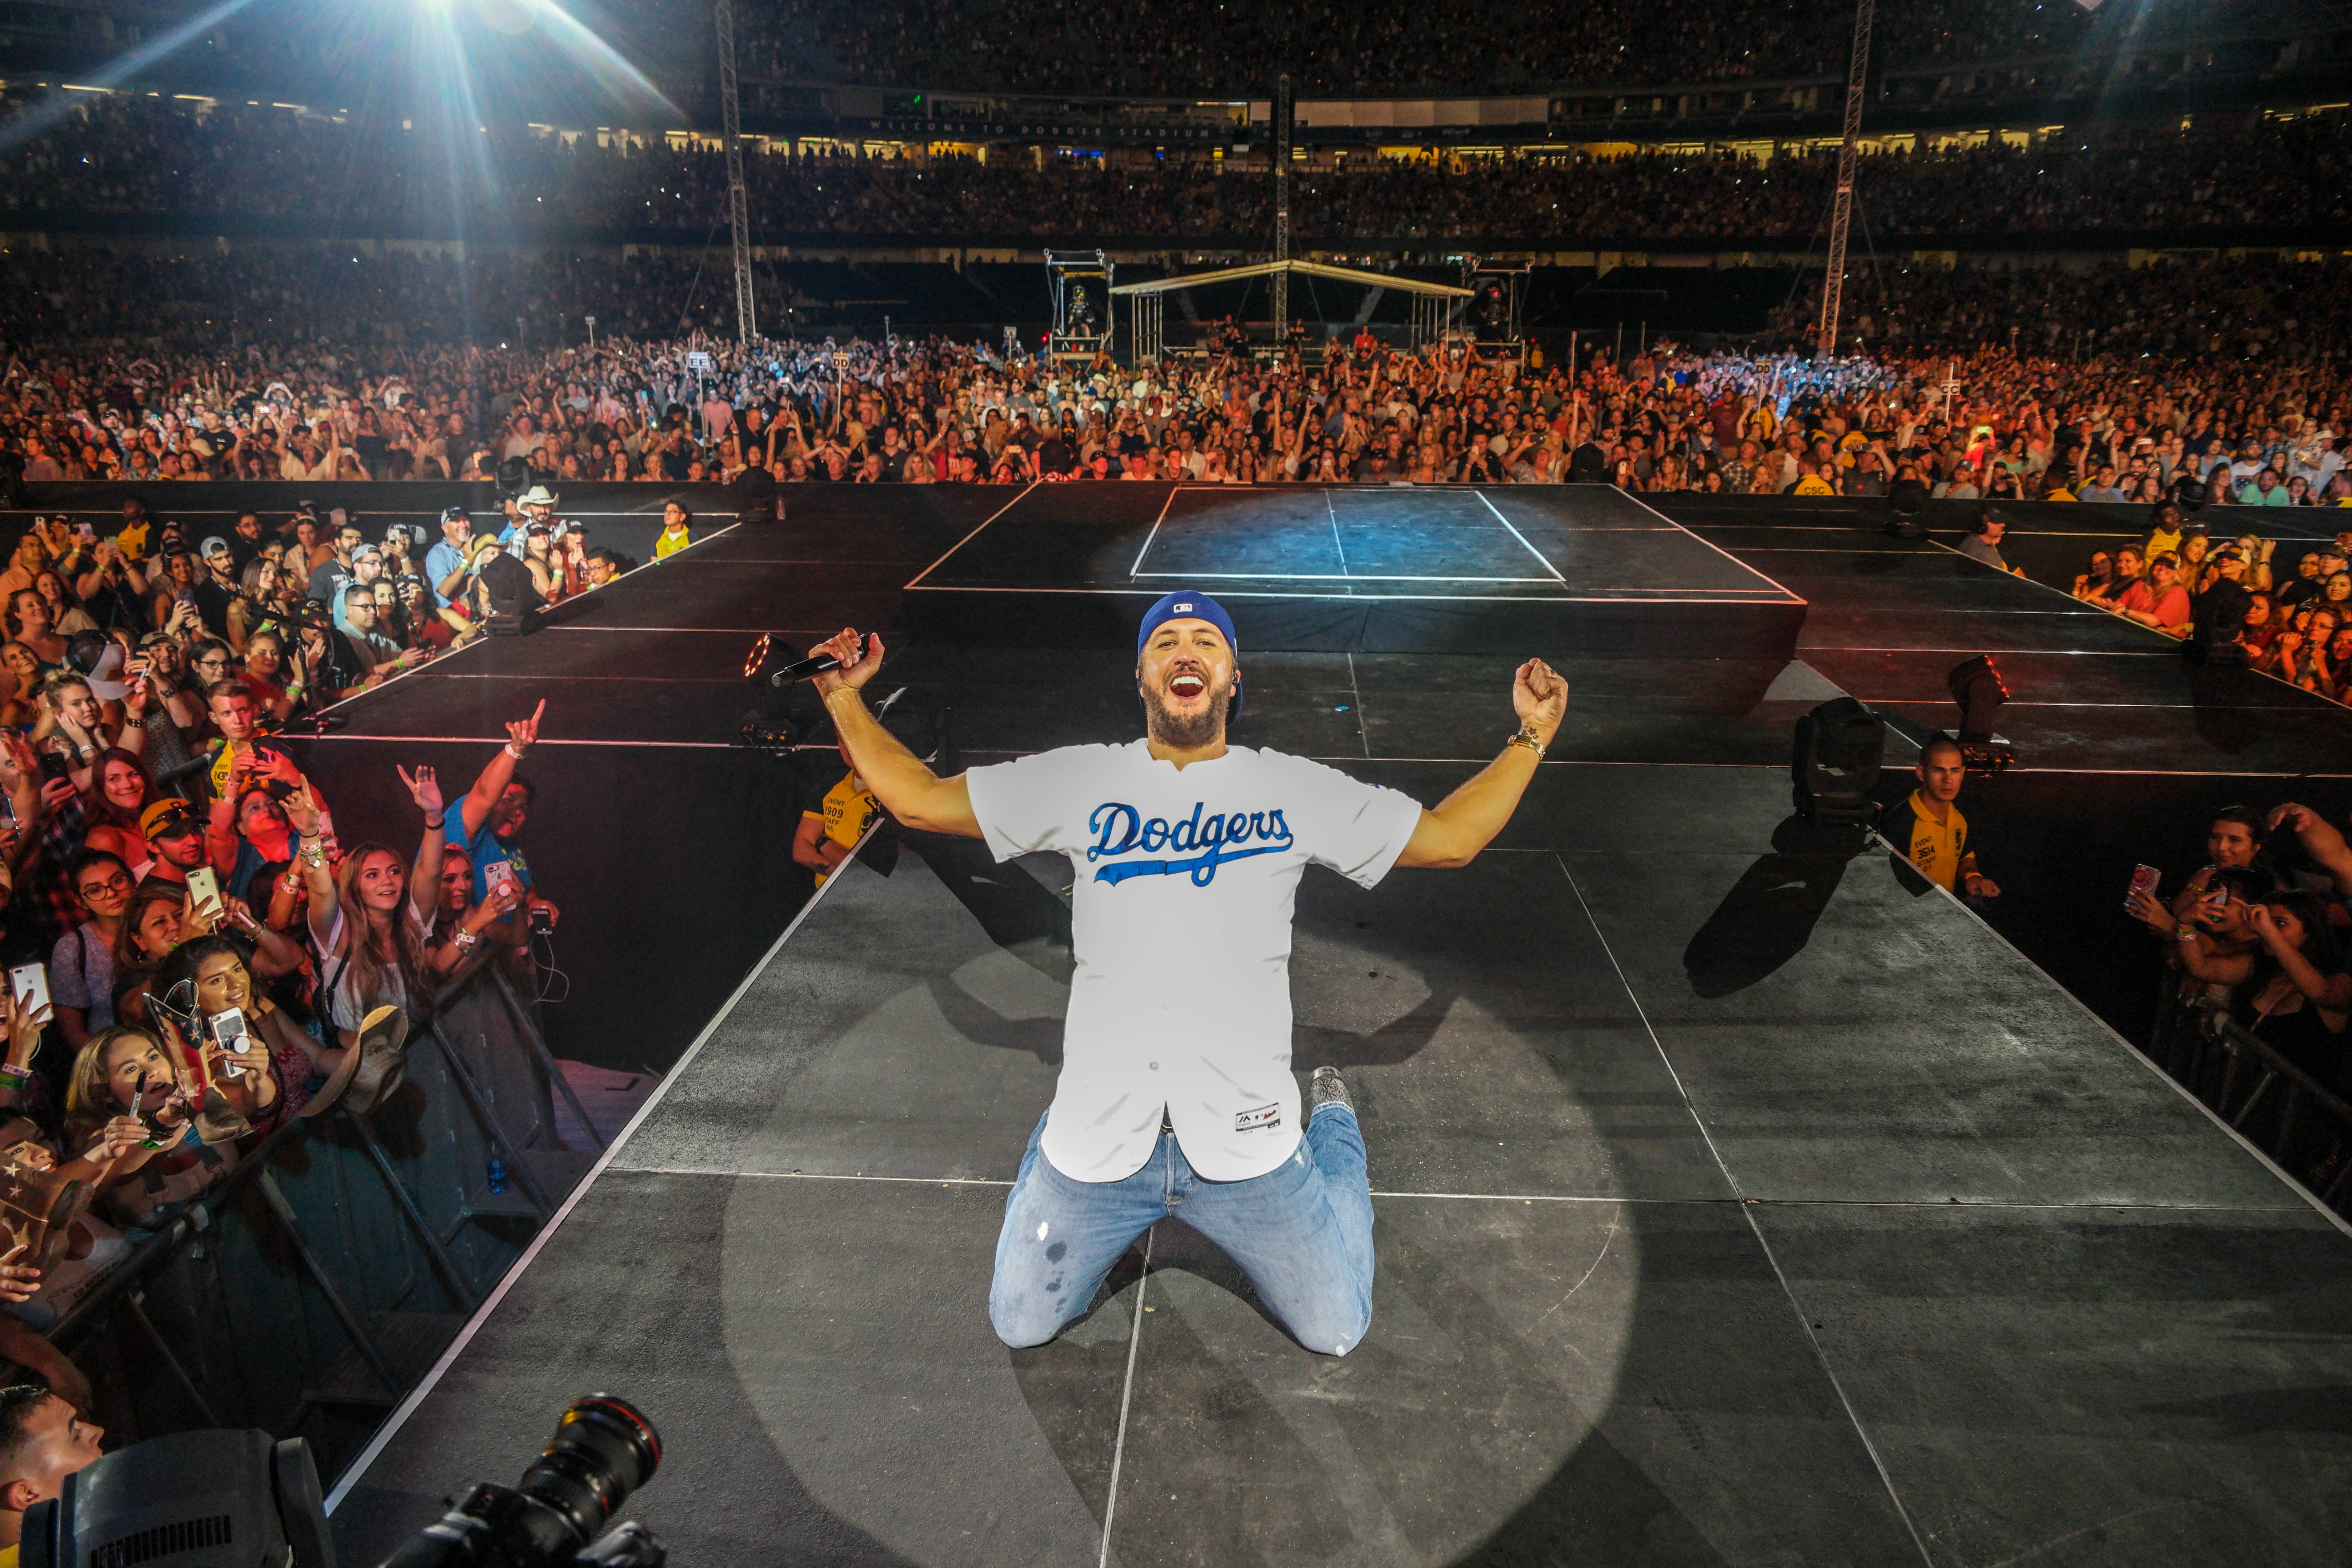 More summer concerts are coming to Dodger Stadium